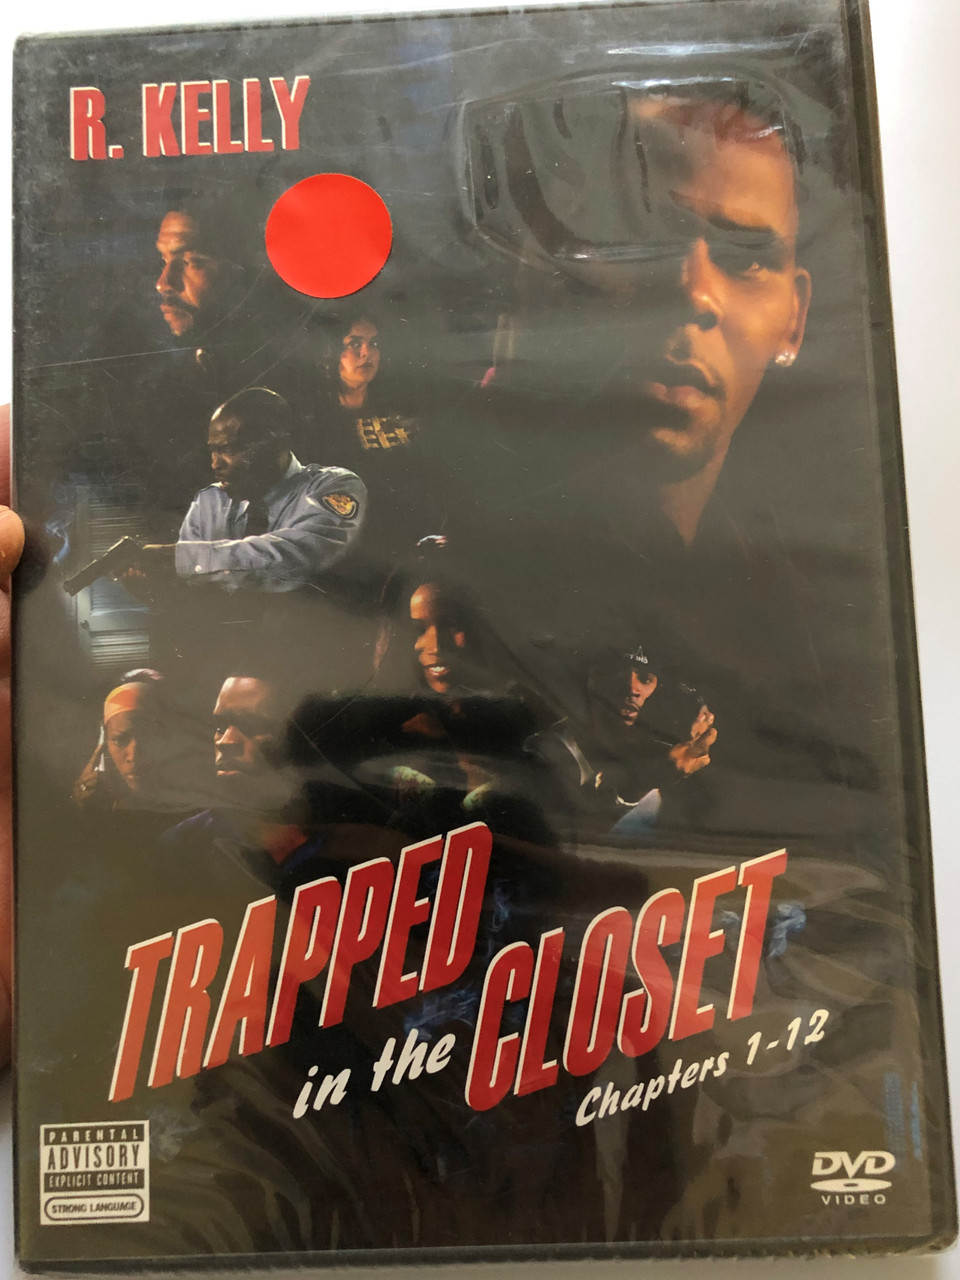 R. Kelly - Trapped in the Closet DVD 2005 Chapters 1-12 / Directed by R.  Kelly, Jim Swaffield / Starring: R. Kelly, Cat Wilson, Rolando A. Boyce,  LeShay Tomlinson / An opera by American R&B singer - bibleinmylanguage